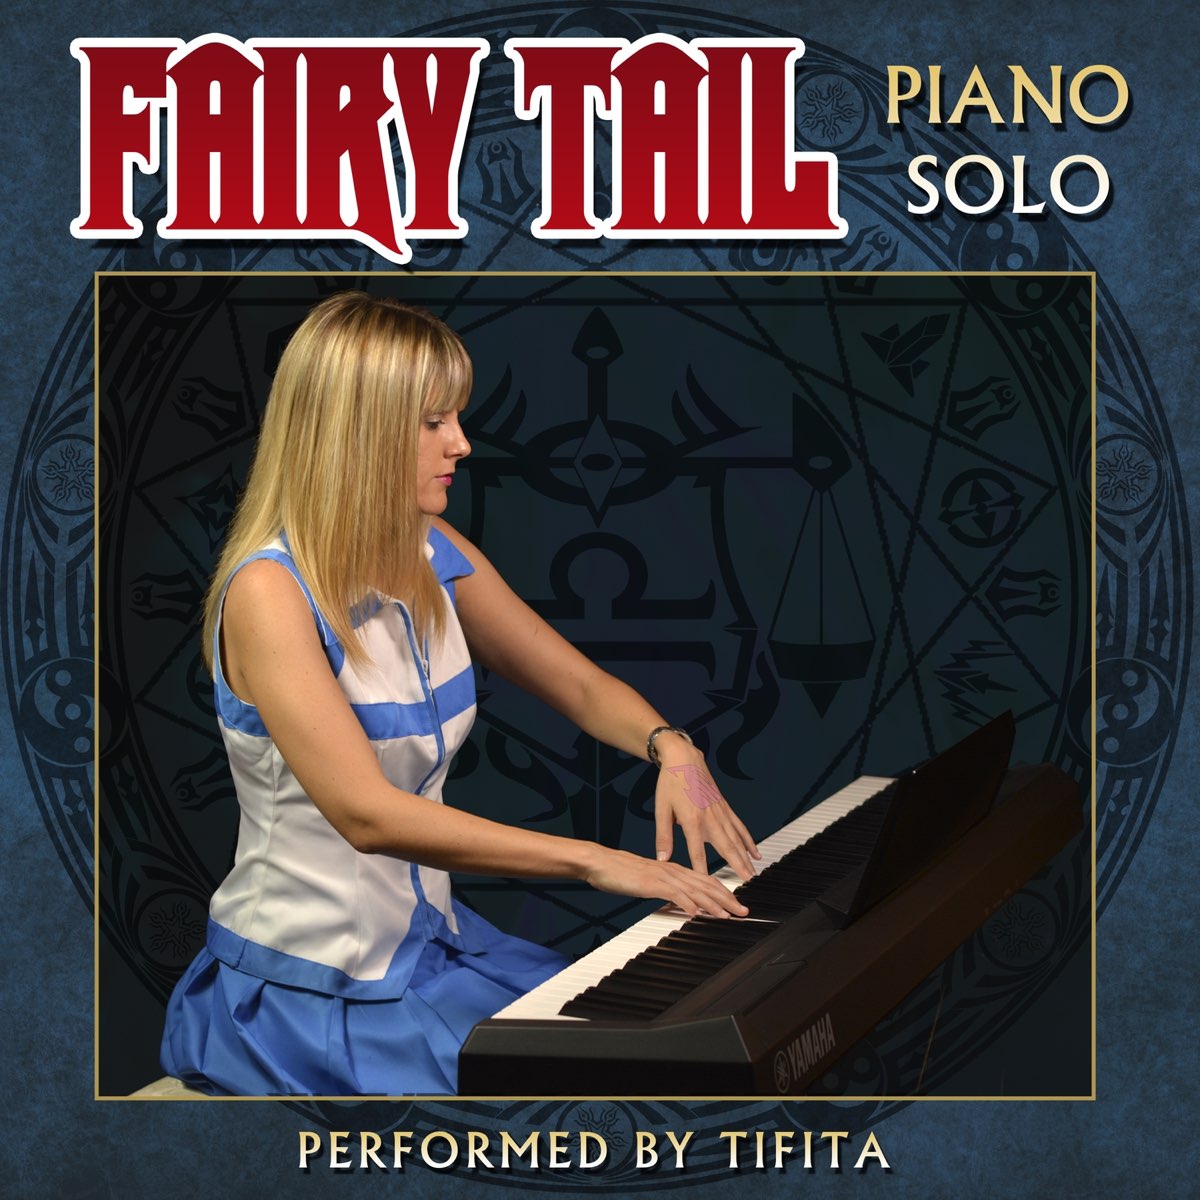 Fairy Tail: Piano Solo by Tifita on Apple Music